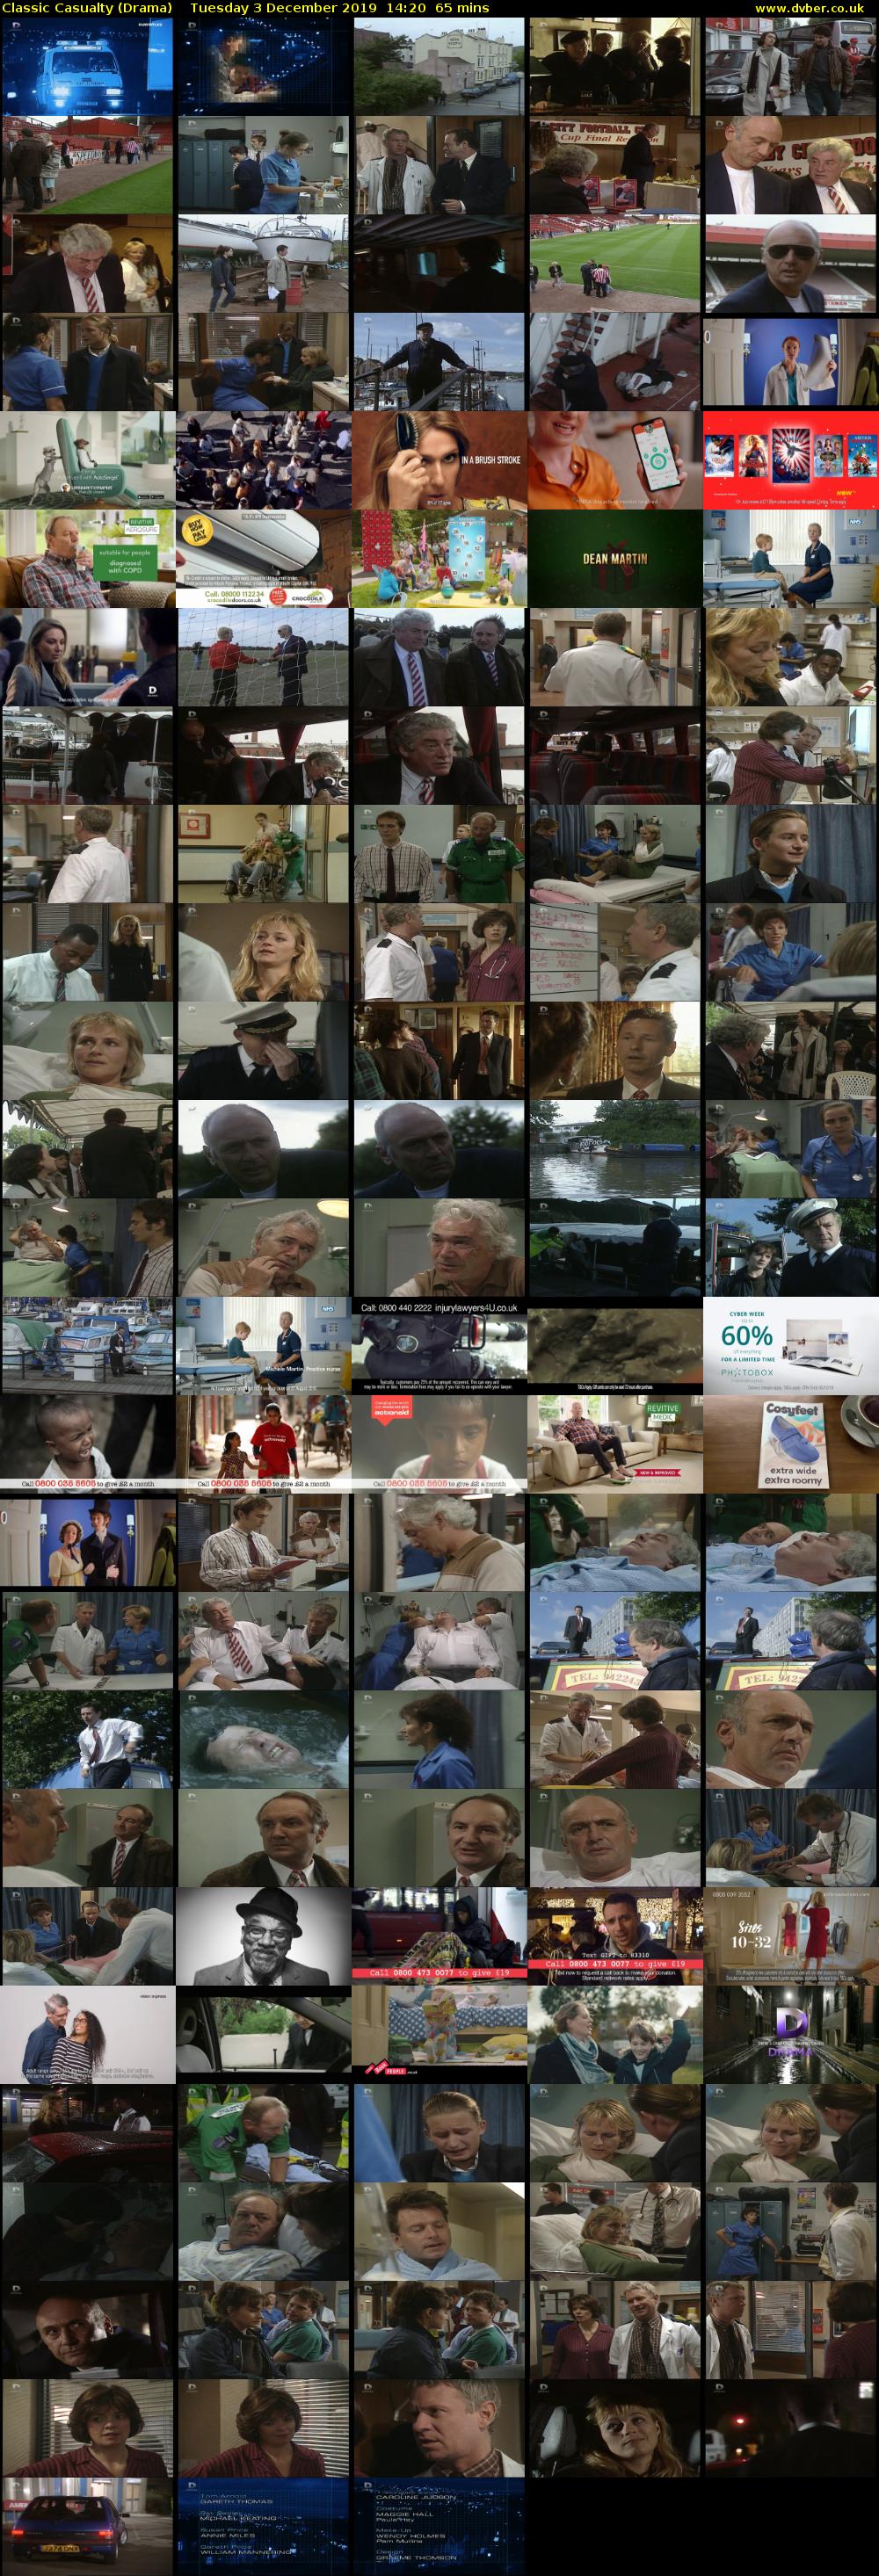 Classic Casualty (Drama) Tuesday 3 December 2019 14:20 - 15:25